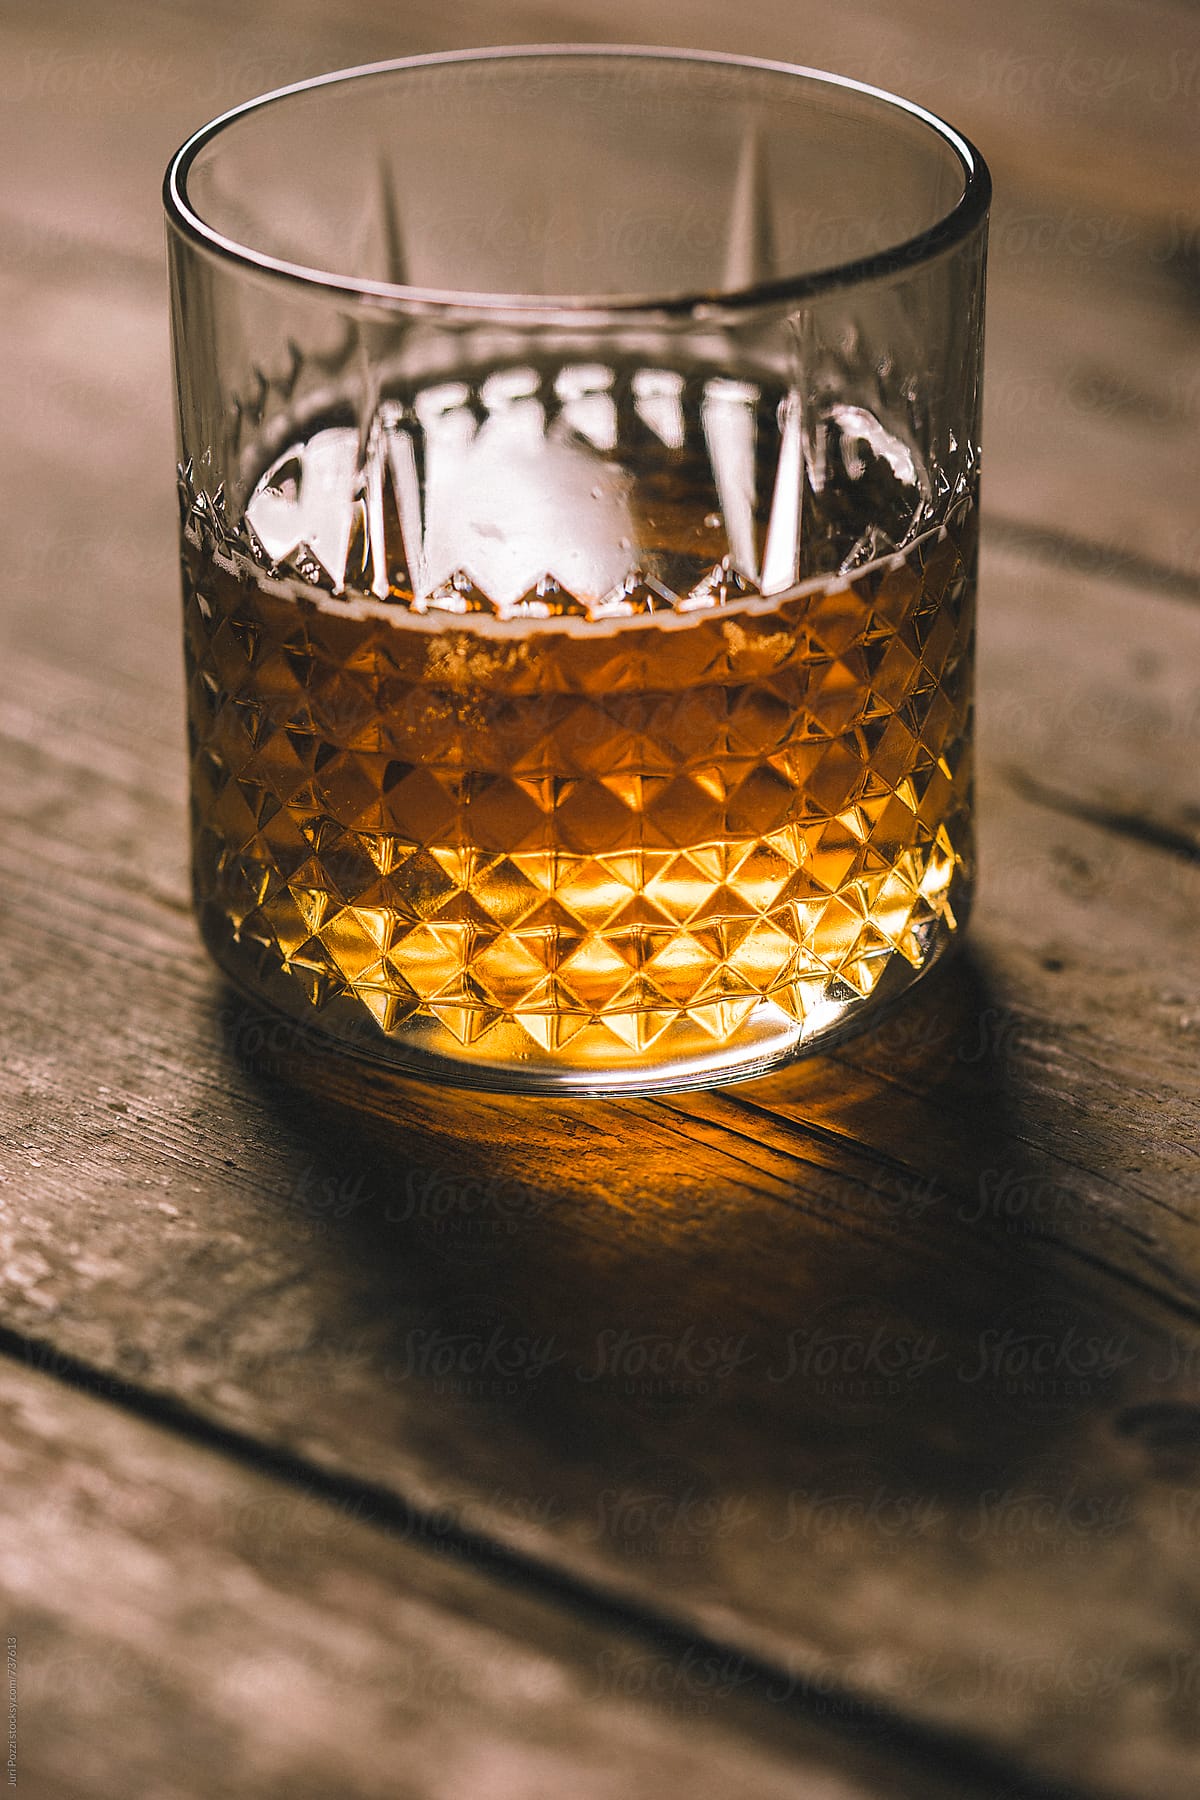 a glass of liquor on a wooden table